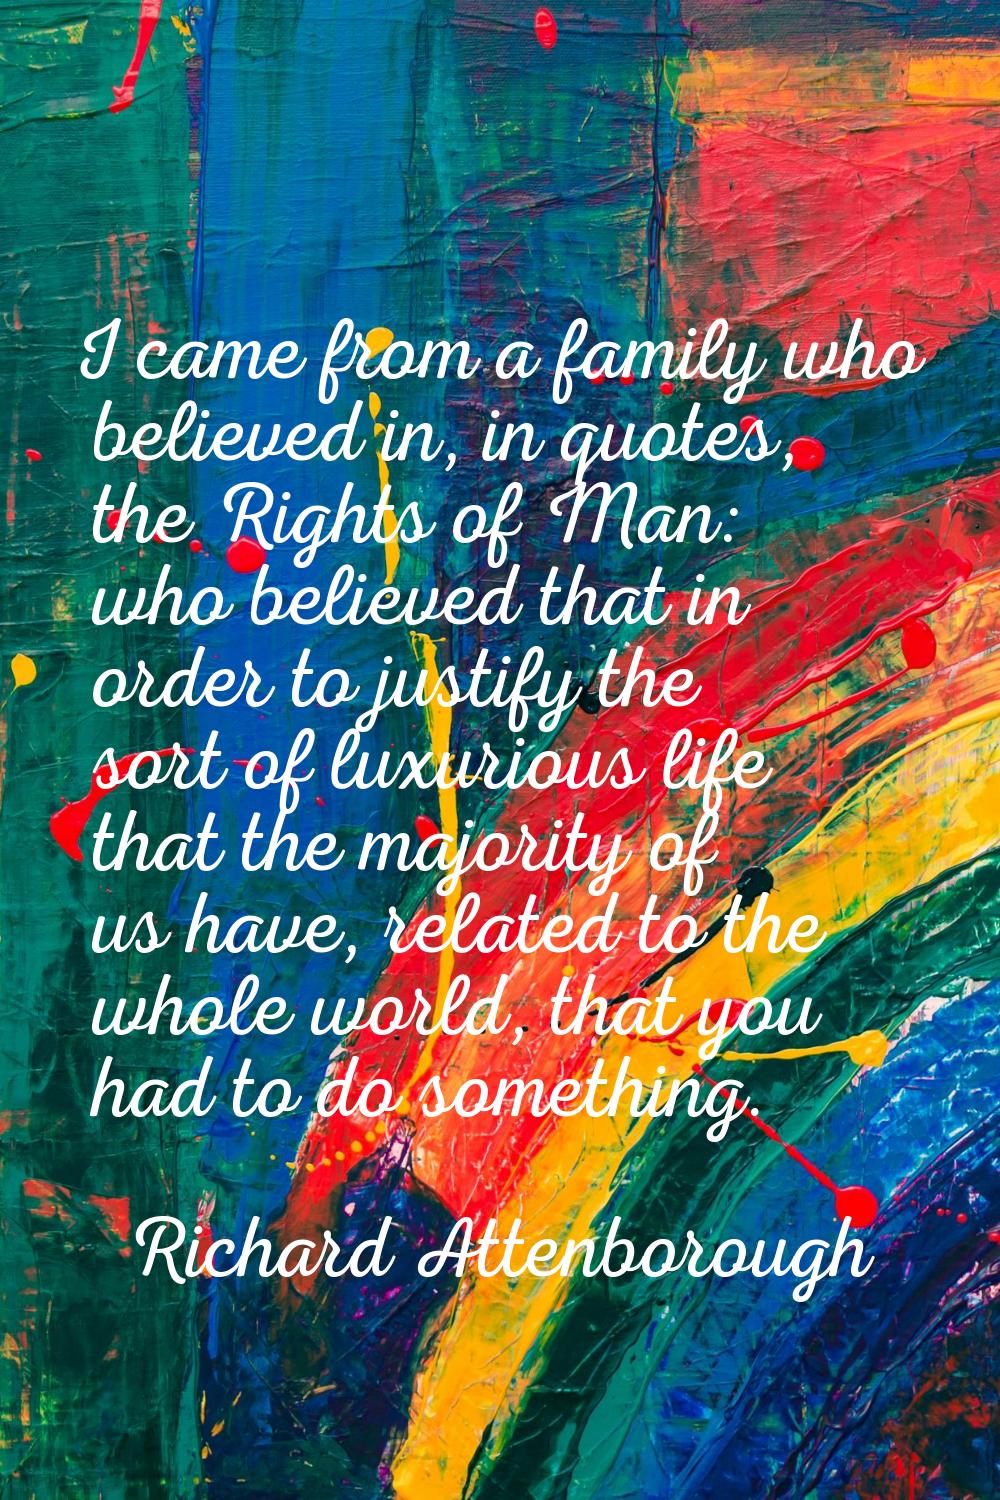 I came from a family who believed in, in quotes, the Rights of Man: who believed that in order to j